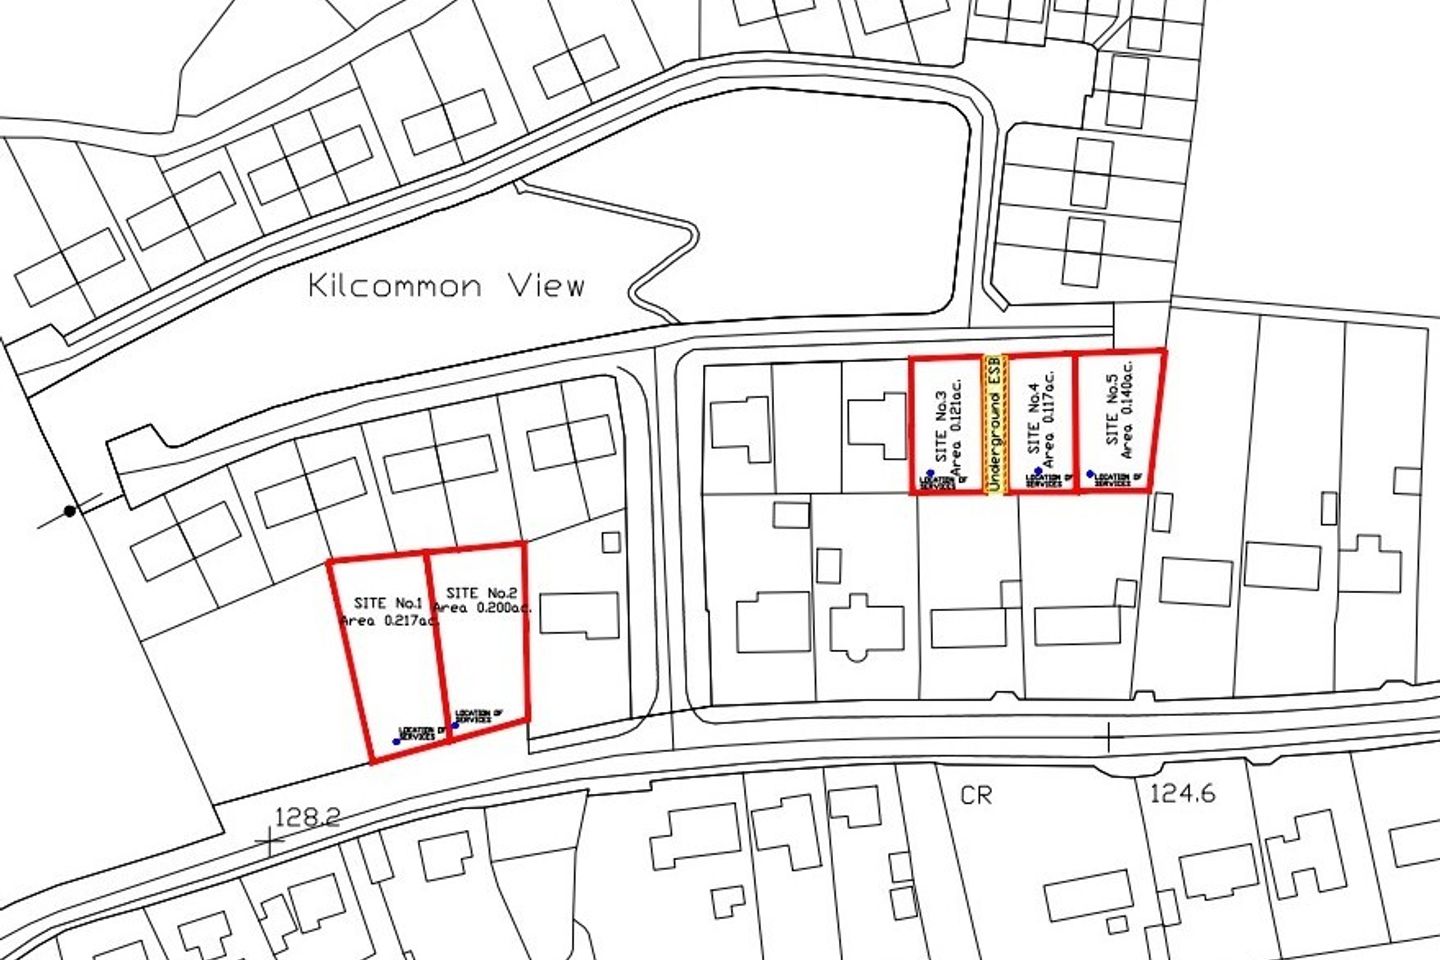 2 Serviced Sites for New Homes (Ready to Build Scheme), Kilcommon, Tinahely, Co. Wicklow